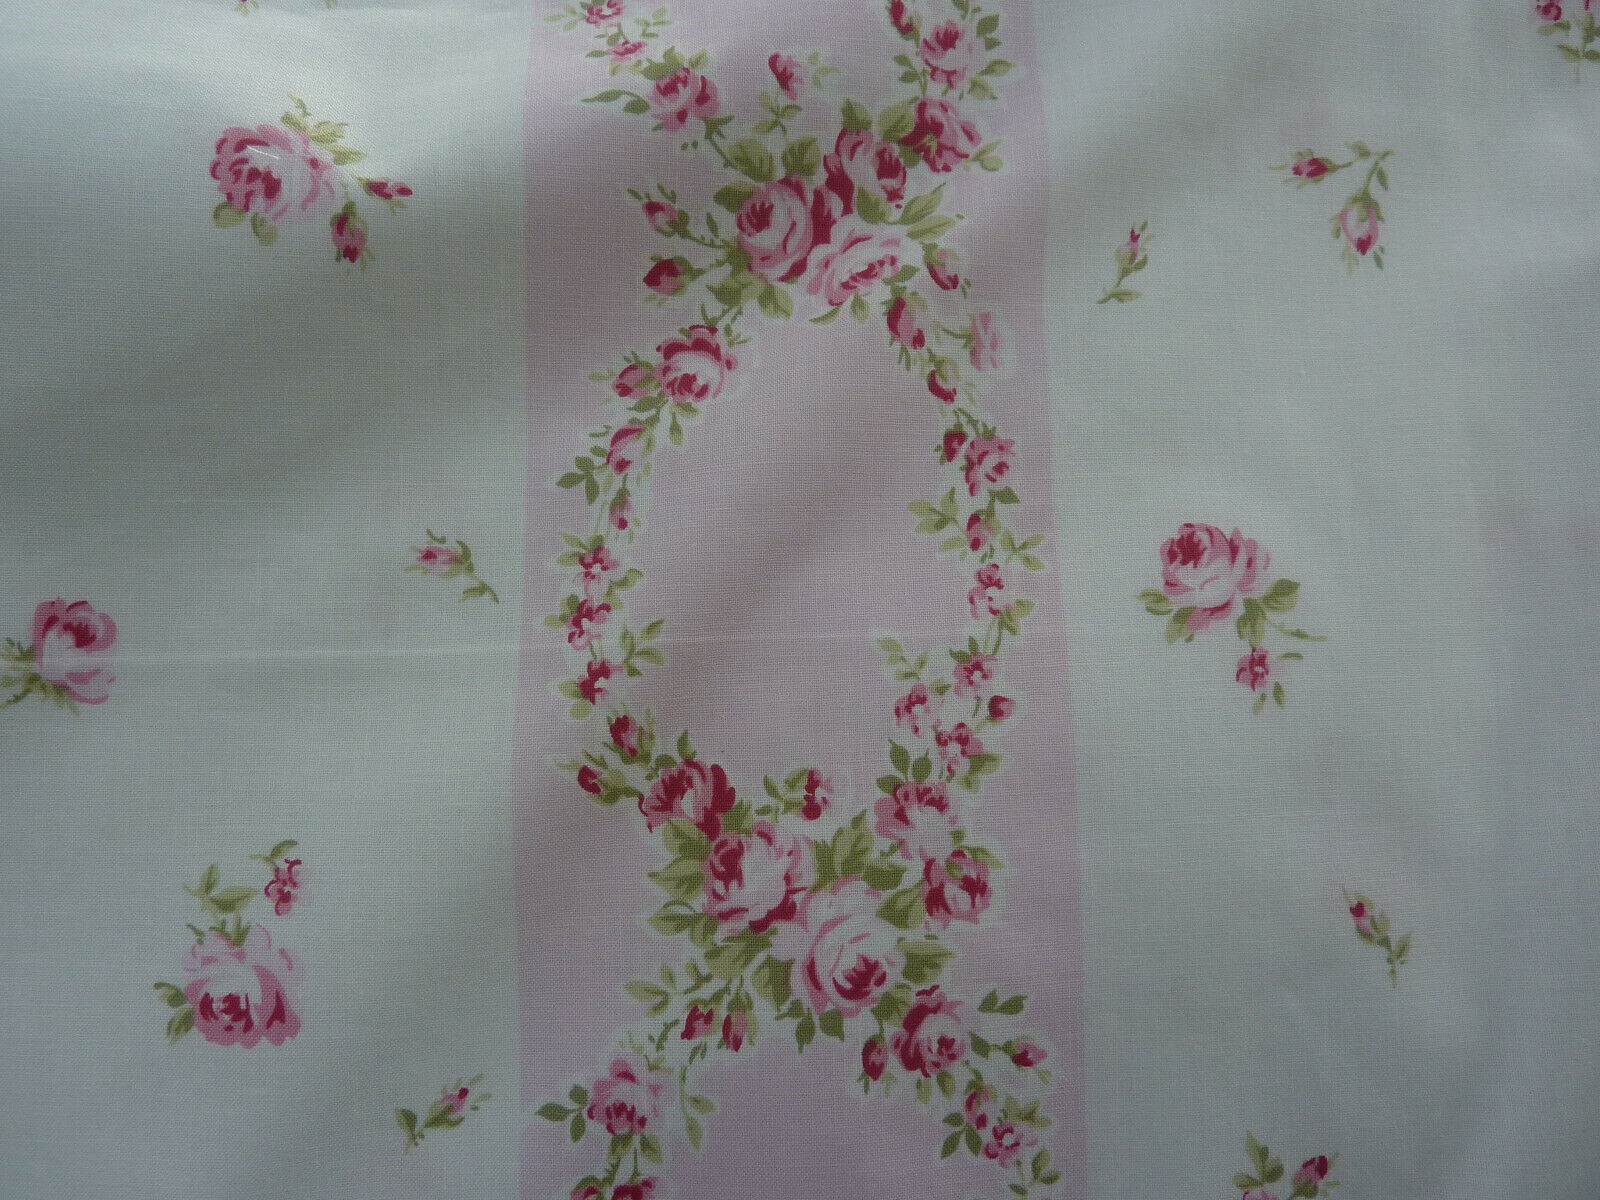 Yuwa 1940's Vintage Pillowcase Cotton Fabric Pink Raspberry Roses on White 1 Yd.